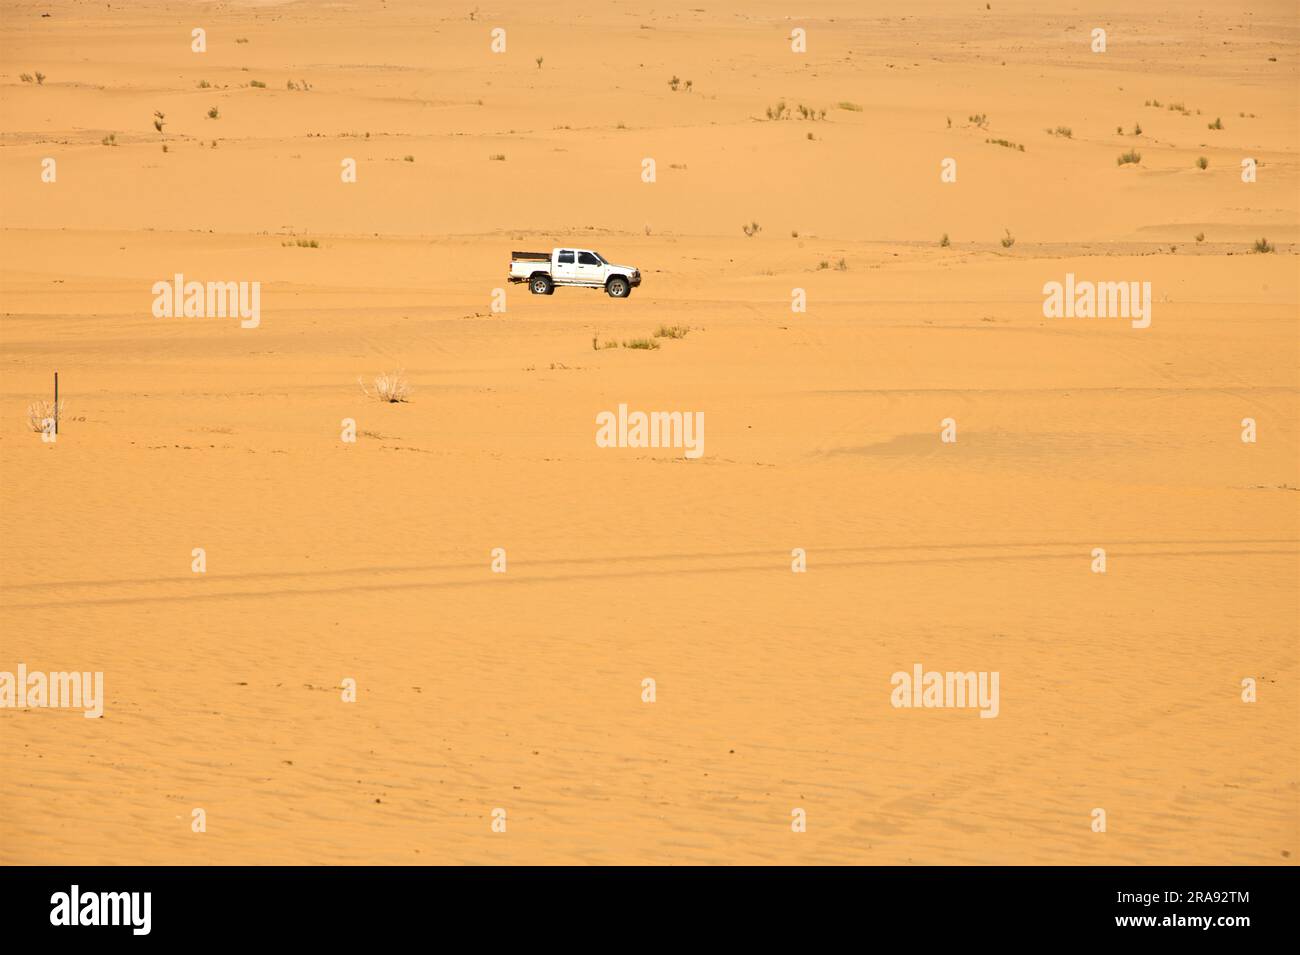 A SUV car crossing the desert with yellow sand on a hot day Stock Photo